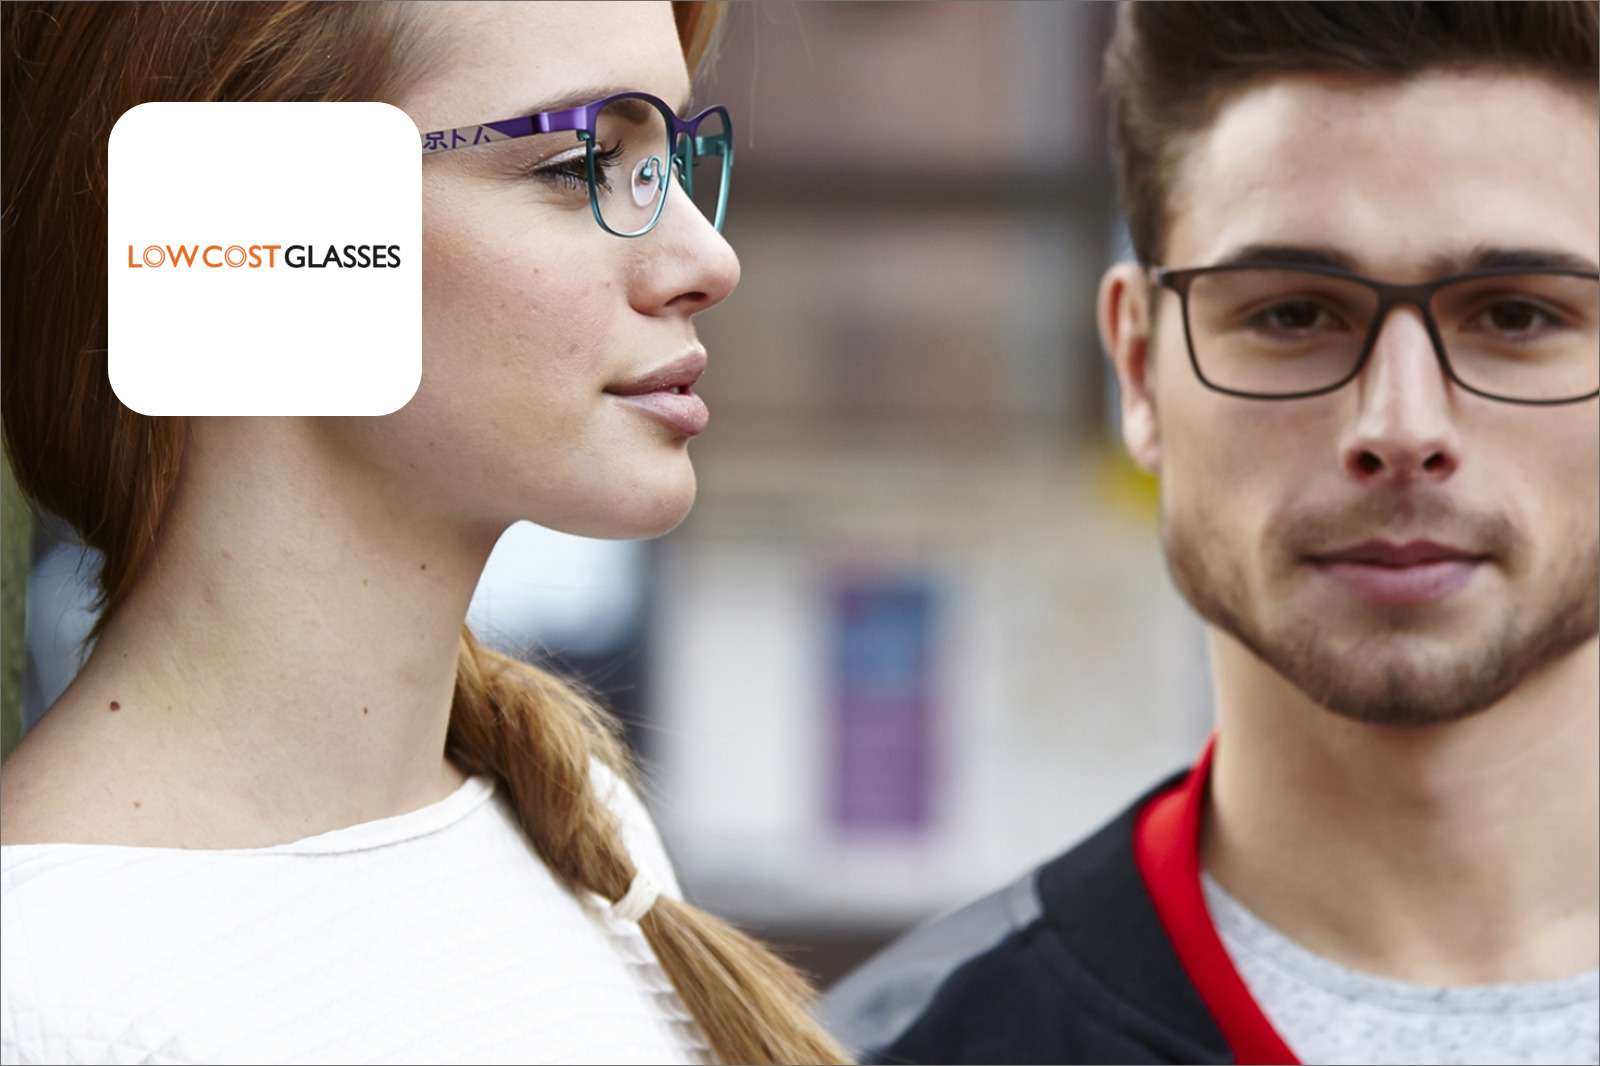 Low Cost Glasses boost email revenue with automation | Dotdigital